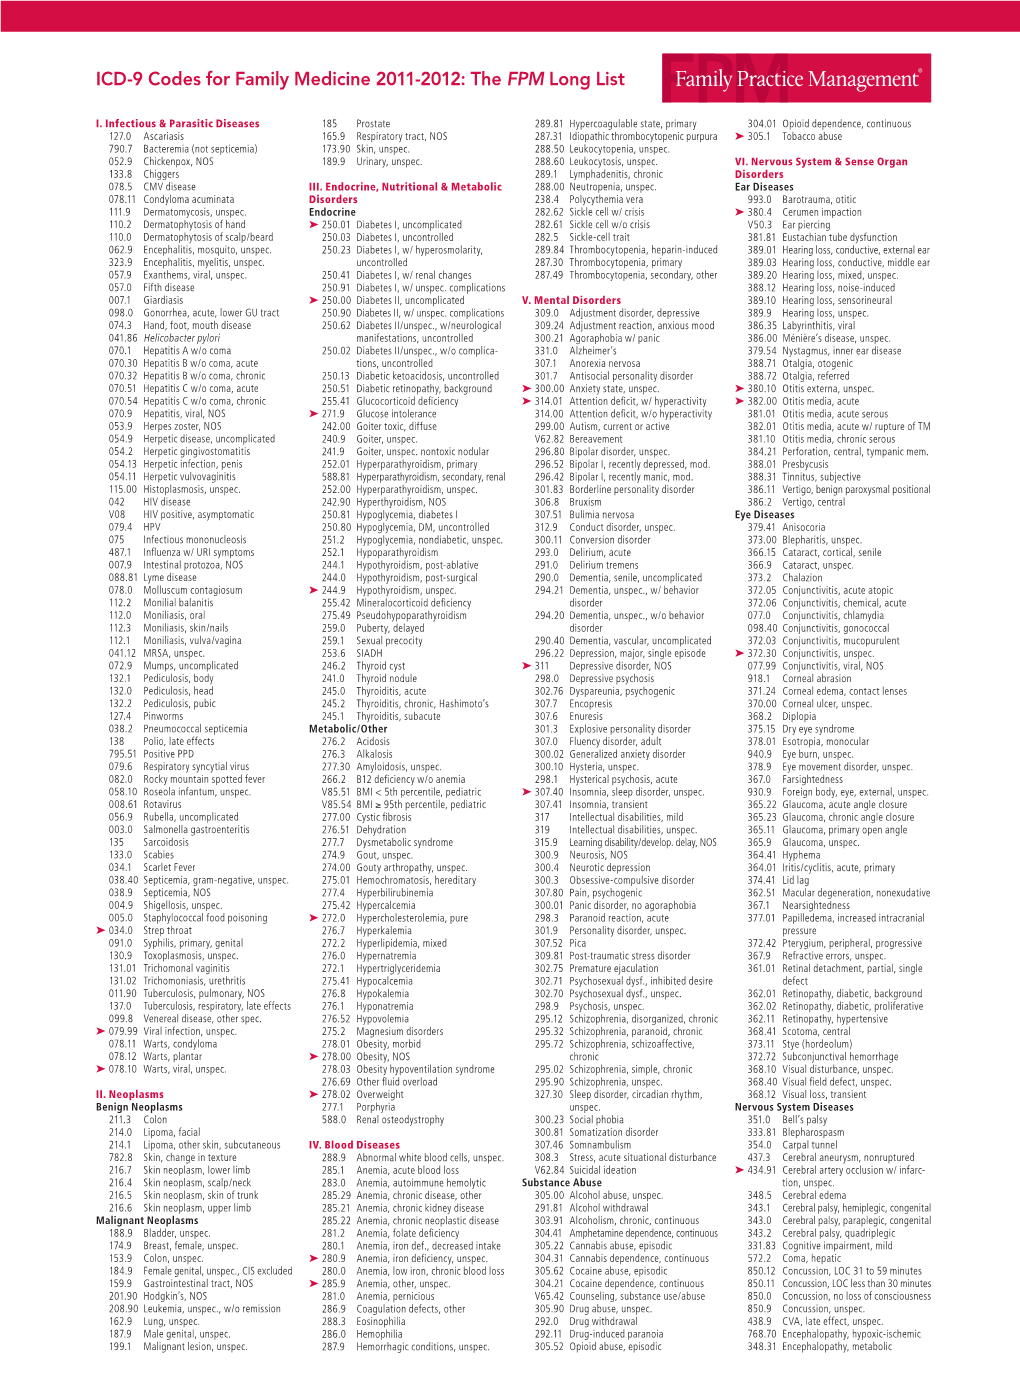 ICD-9 Codes for Family Medicine 2011-2012: the FPM Long List